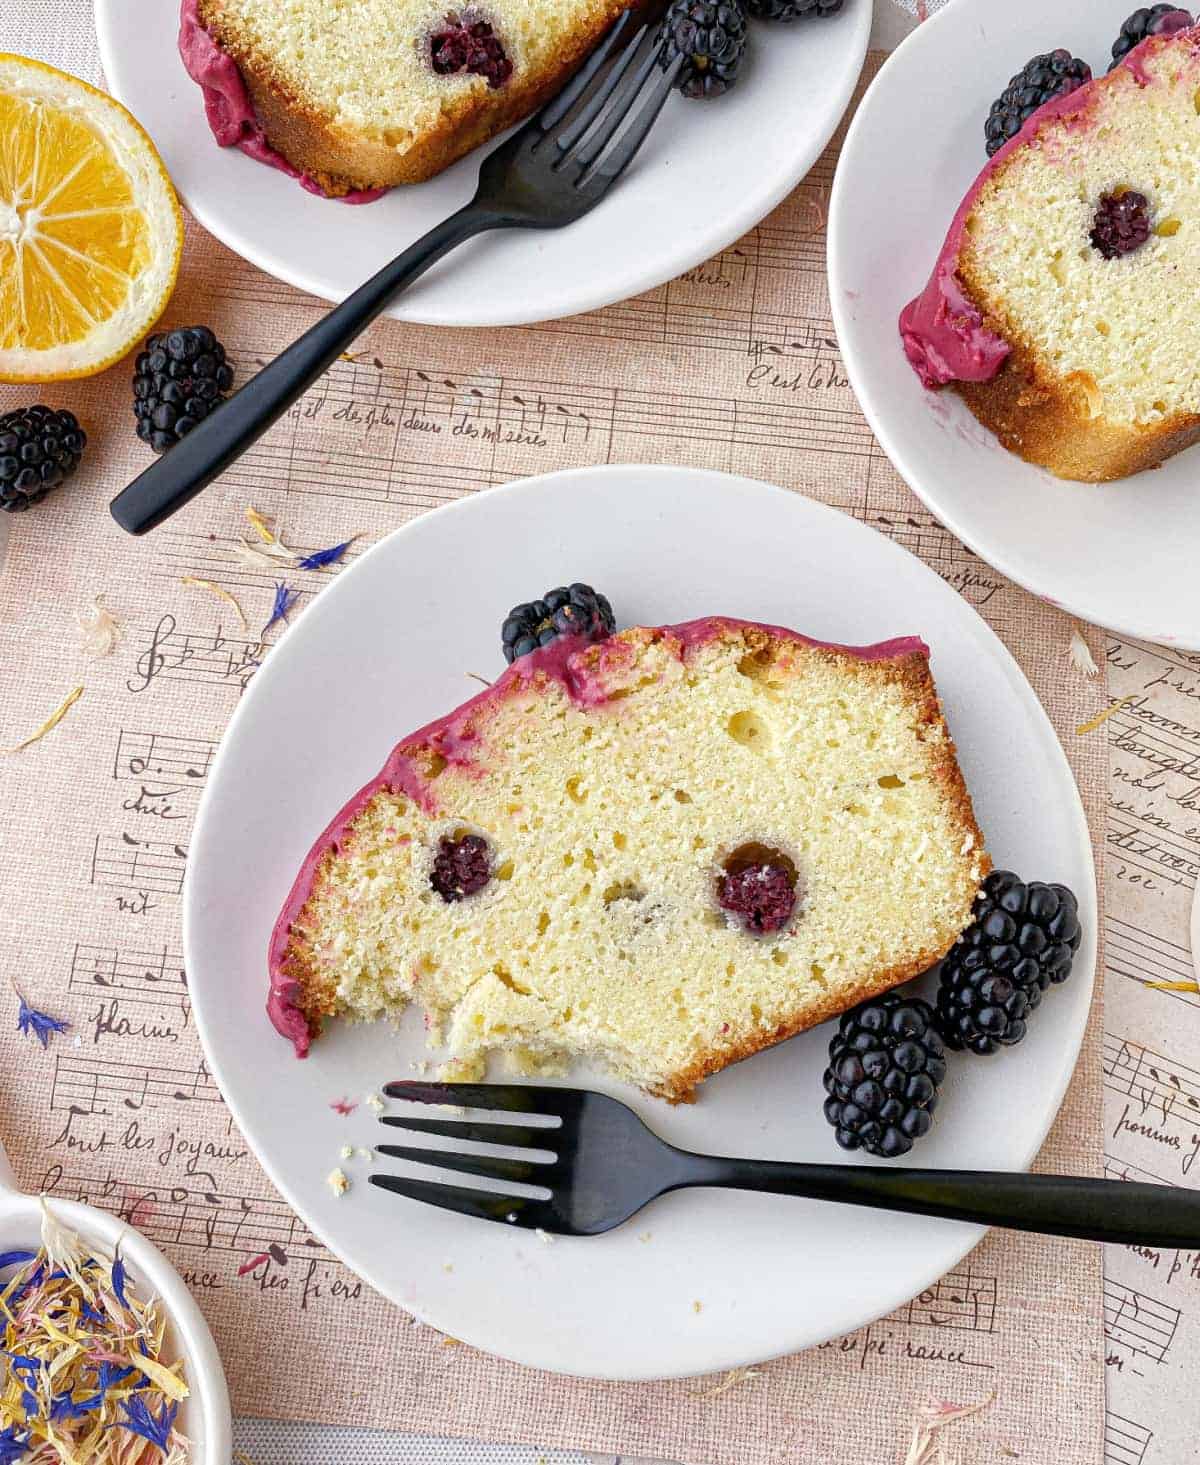 Partially eaten slice of Blackberry Lemon Bread on a white plate with a black fork next to it.